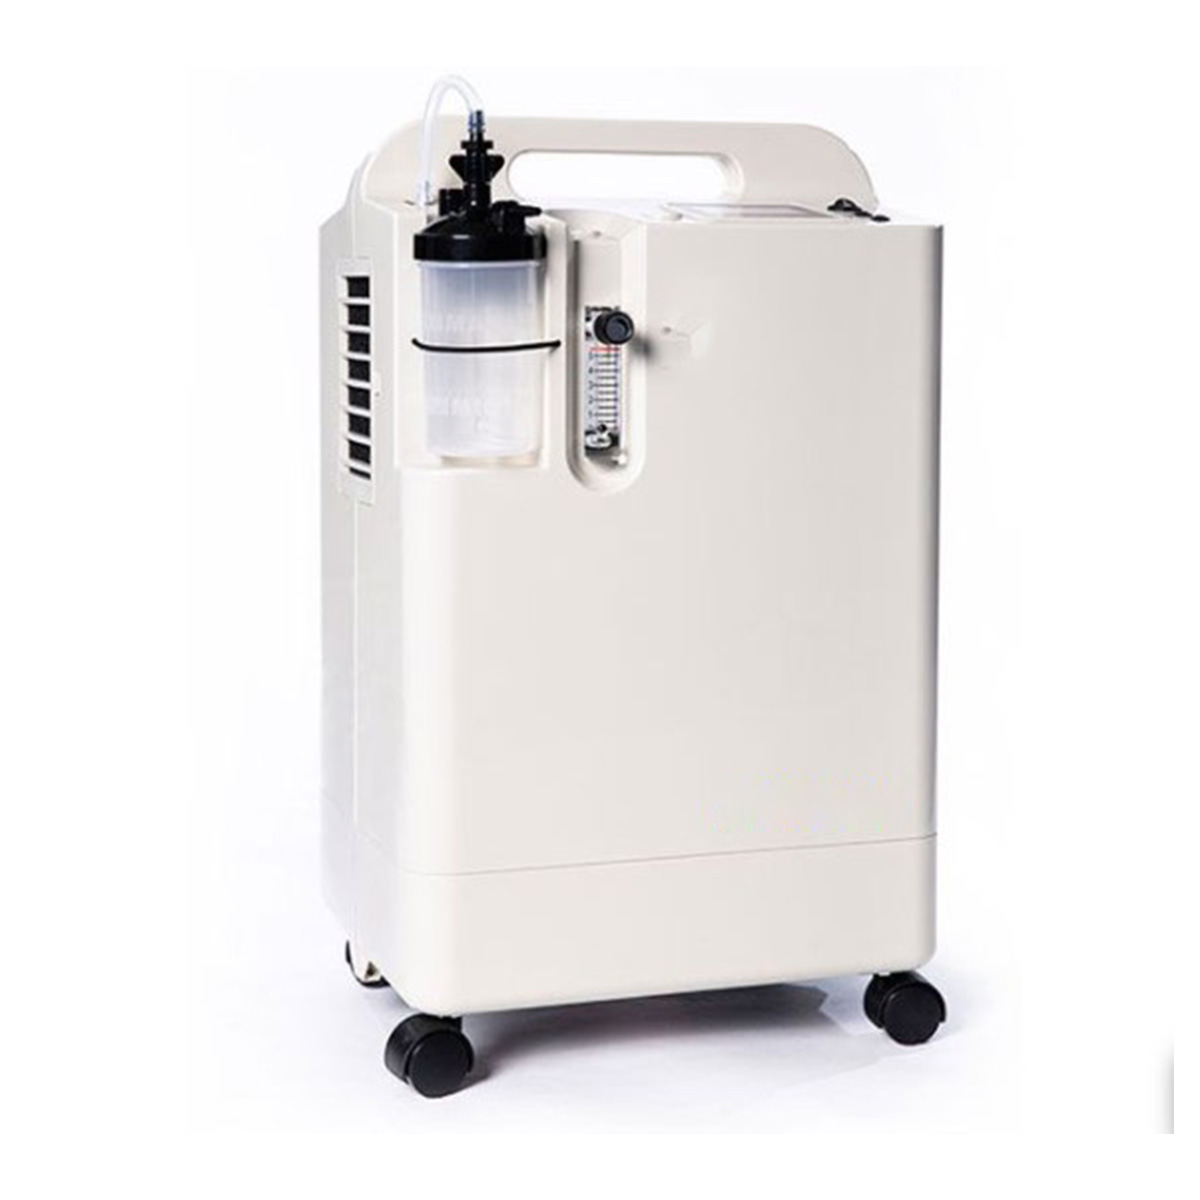 5 Longfian Oxygen Concentrator On Sale Suppliers, Service Provider in Civil lines